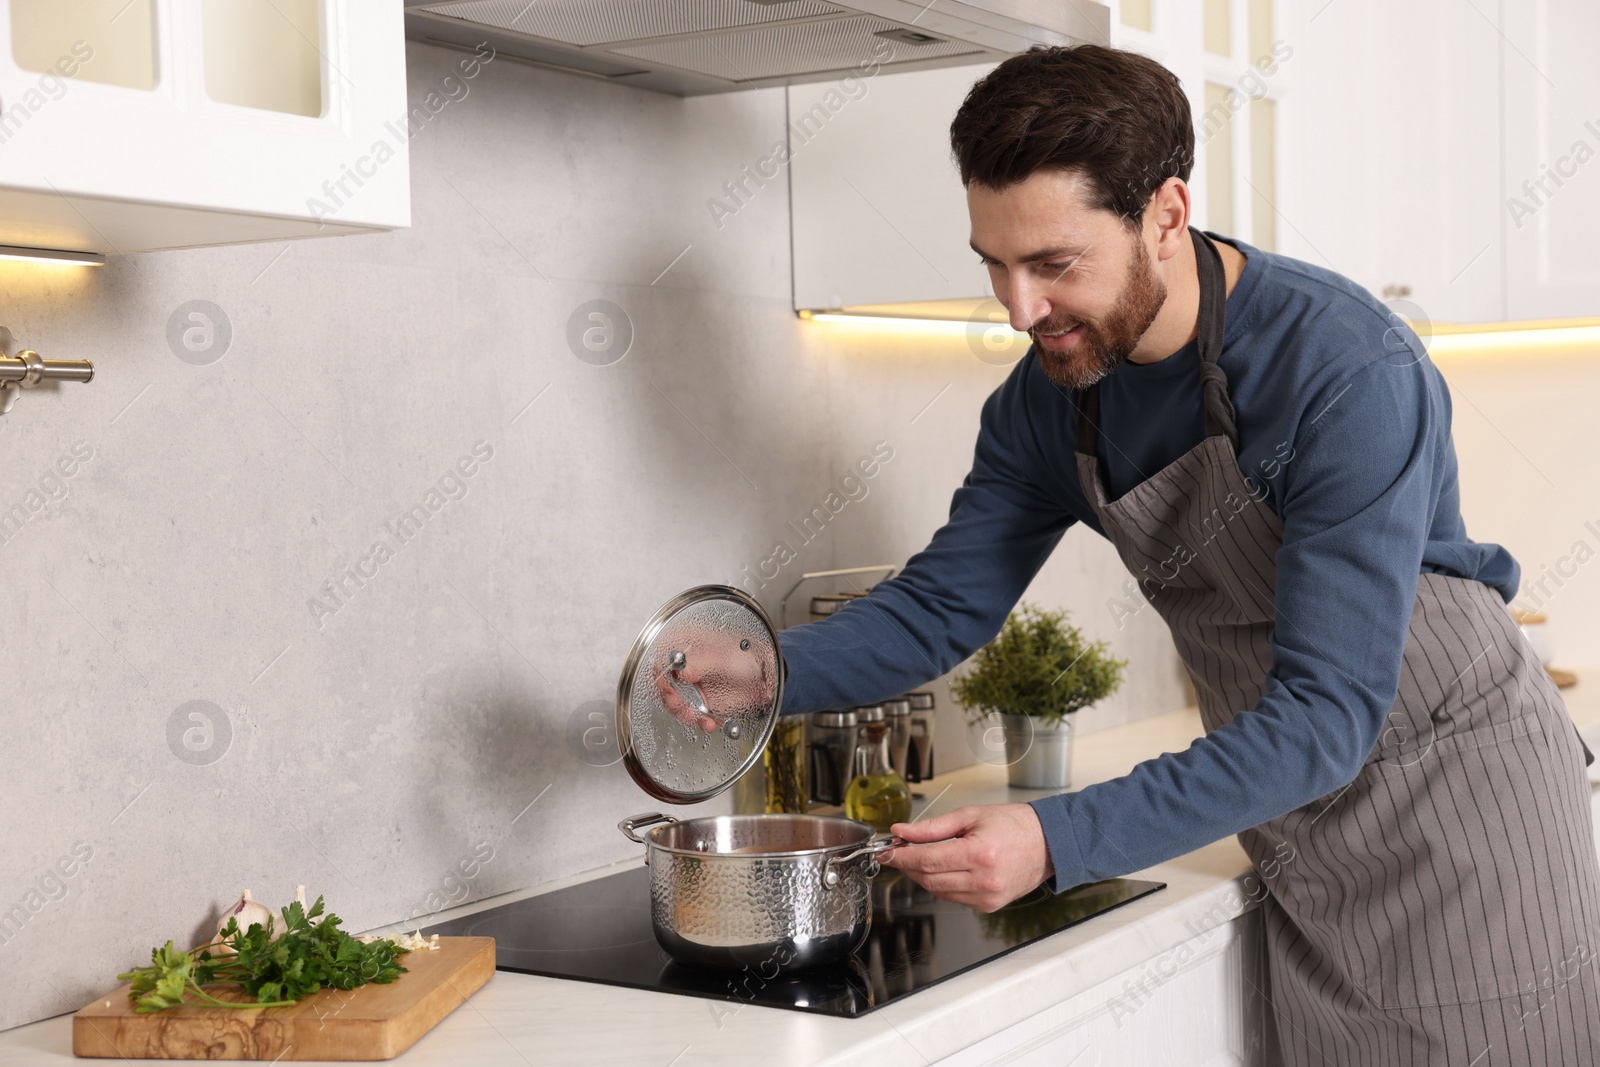 Photo of Man cooking soup on cooktop in kitchen